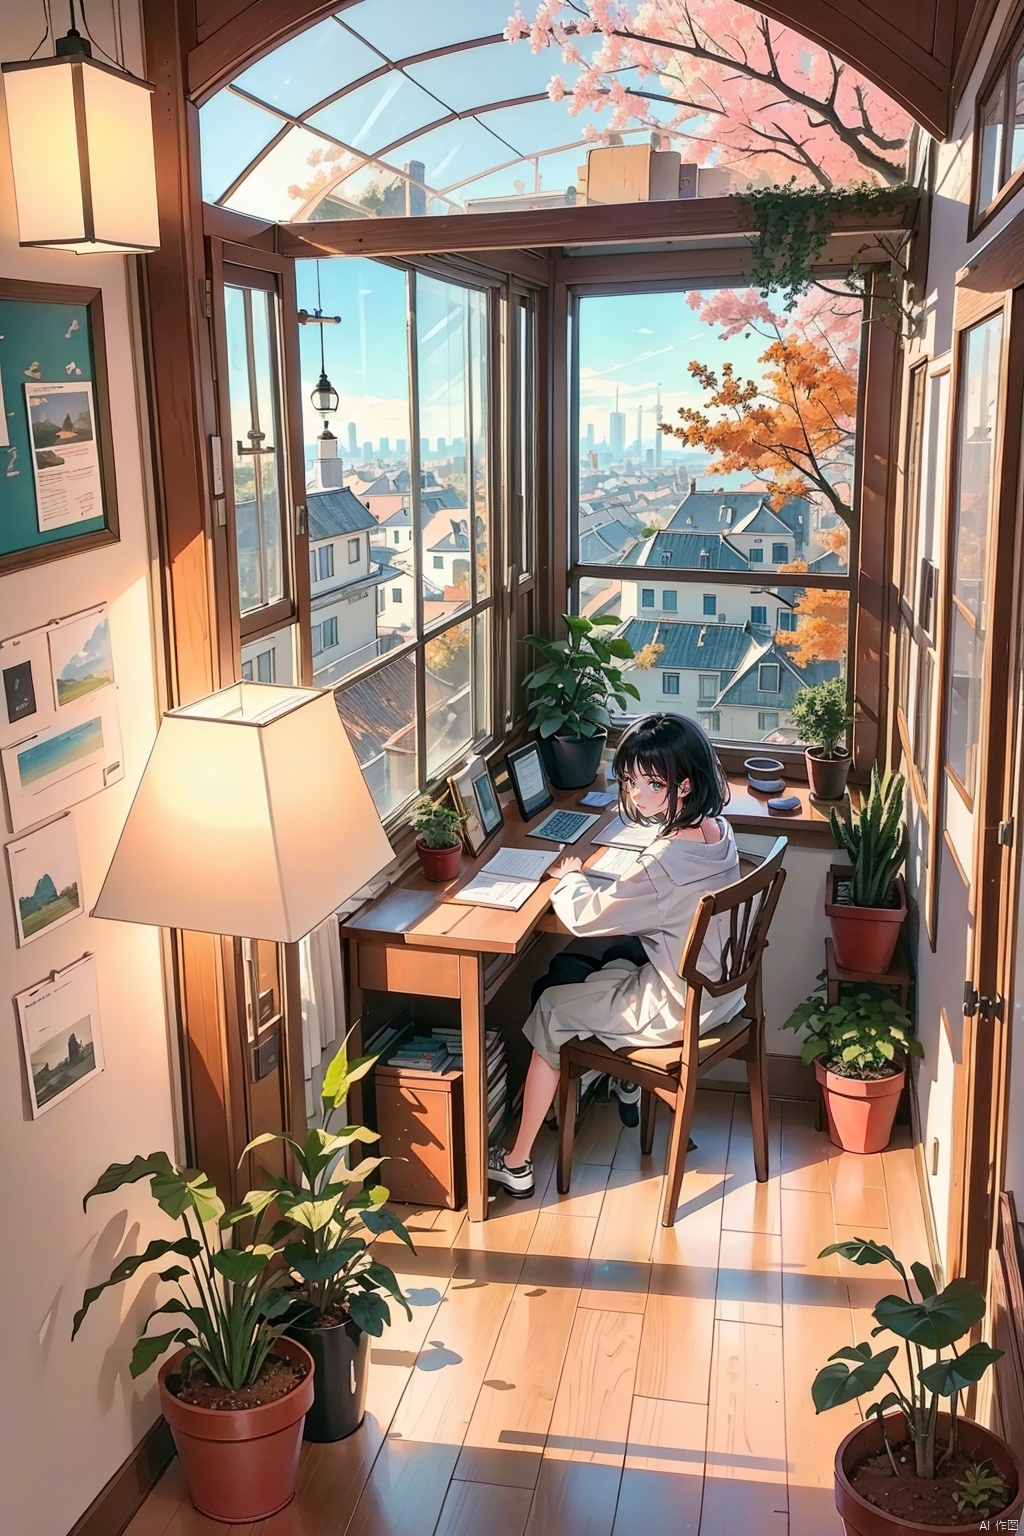  masterpiece, best quality, Best picture quality, best quality, official art, yinyou,
tongxin ,medium scene,indoor scene, floor-to-ceiling window (in the middle of the picture),in the window, a desk is placed across the window,A girl was writing on the table, books are placed on the desk, desk lamp (desk lamp is on) (warm light), green potted plants, background ,outside the window is yard, winter appearance, bare branches,the whole picture of warm orange light.